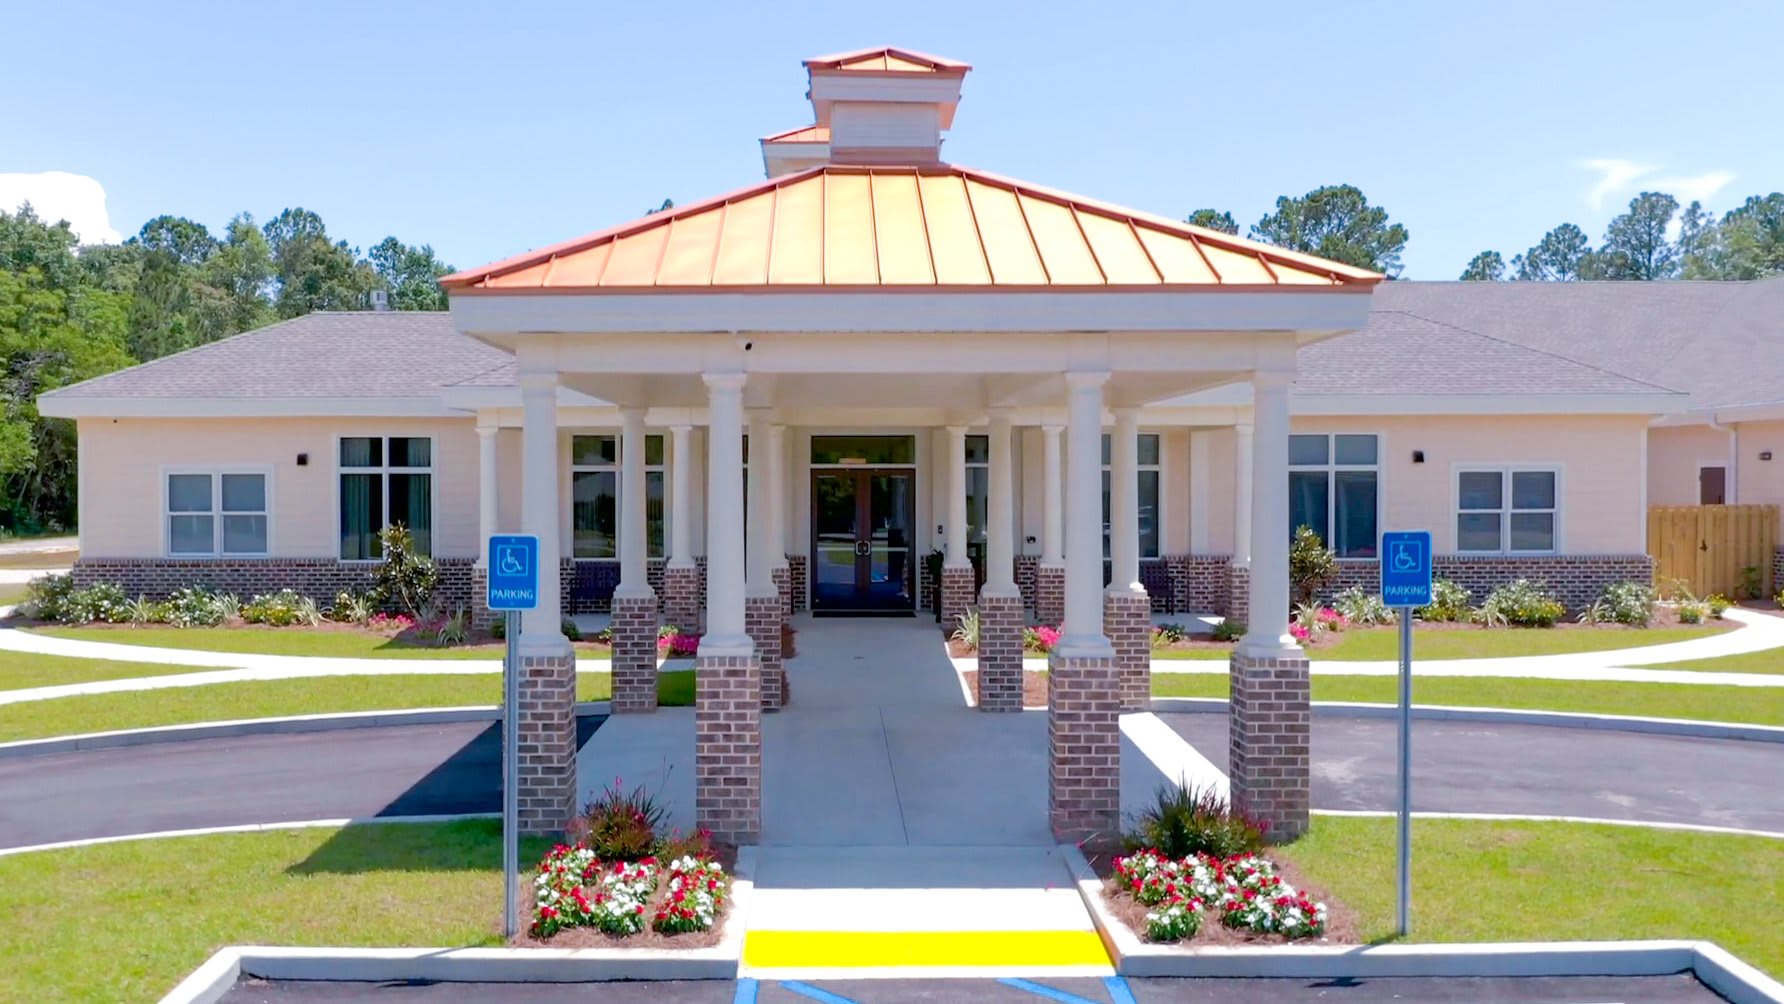 The Homestead Assisted Living Inc